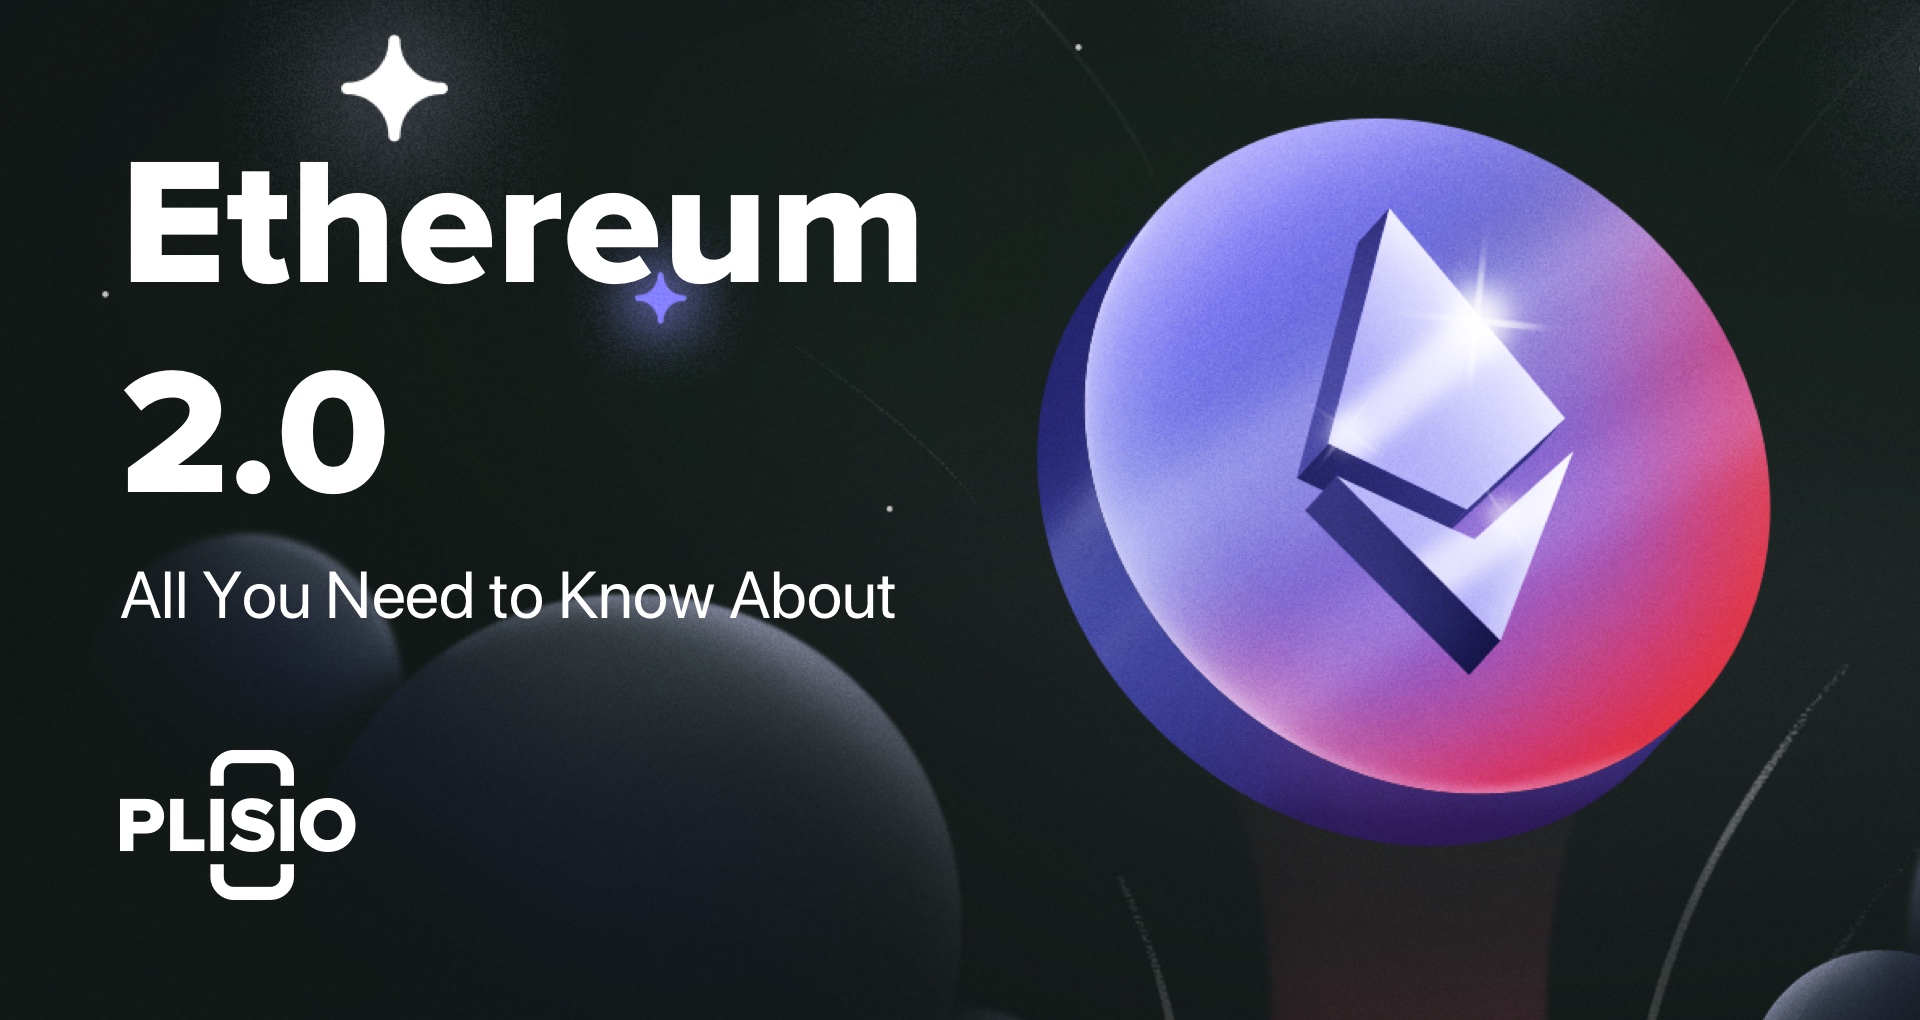 All You Need to Know About Ethereum 2.0